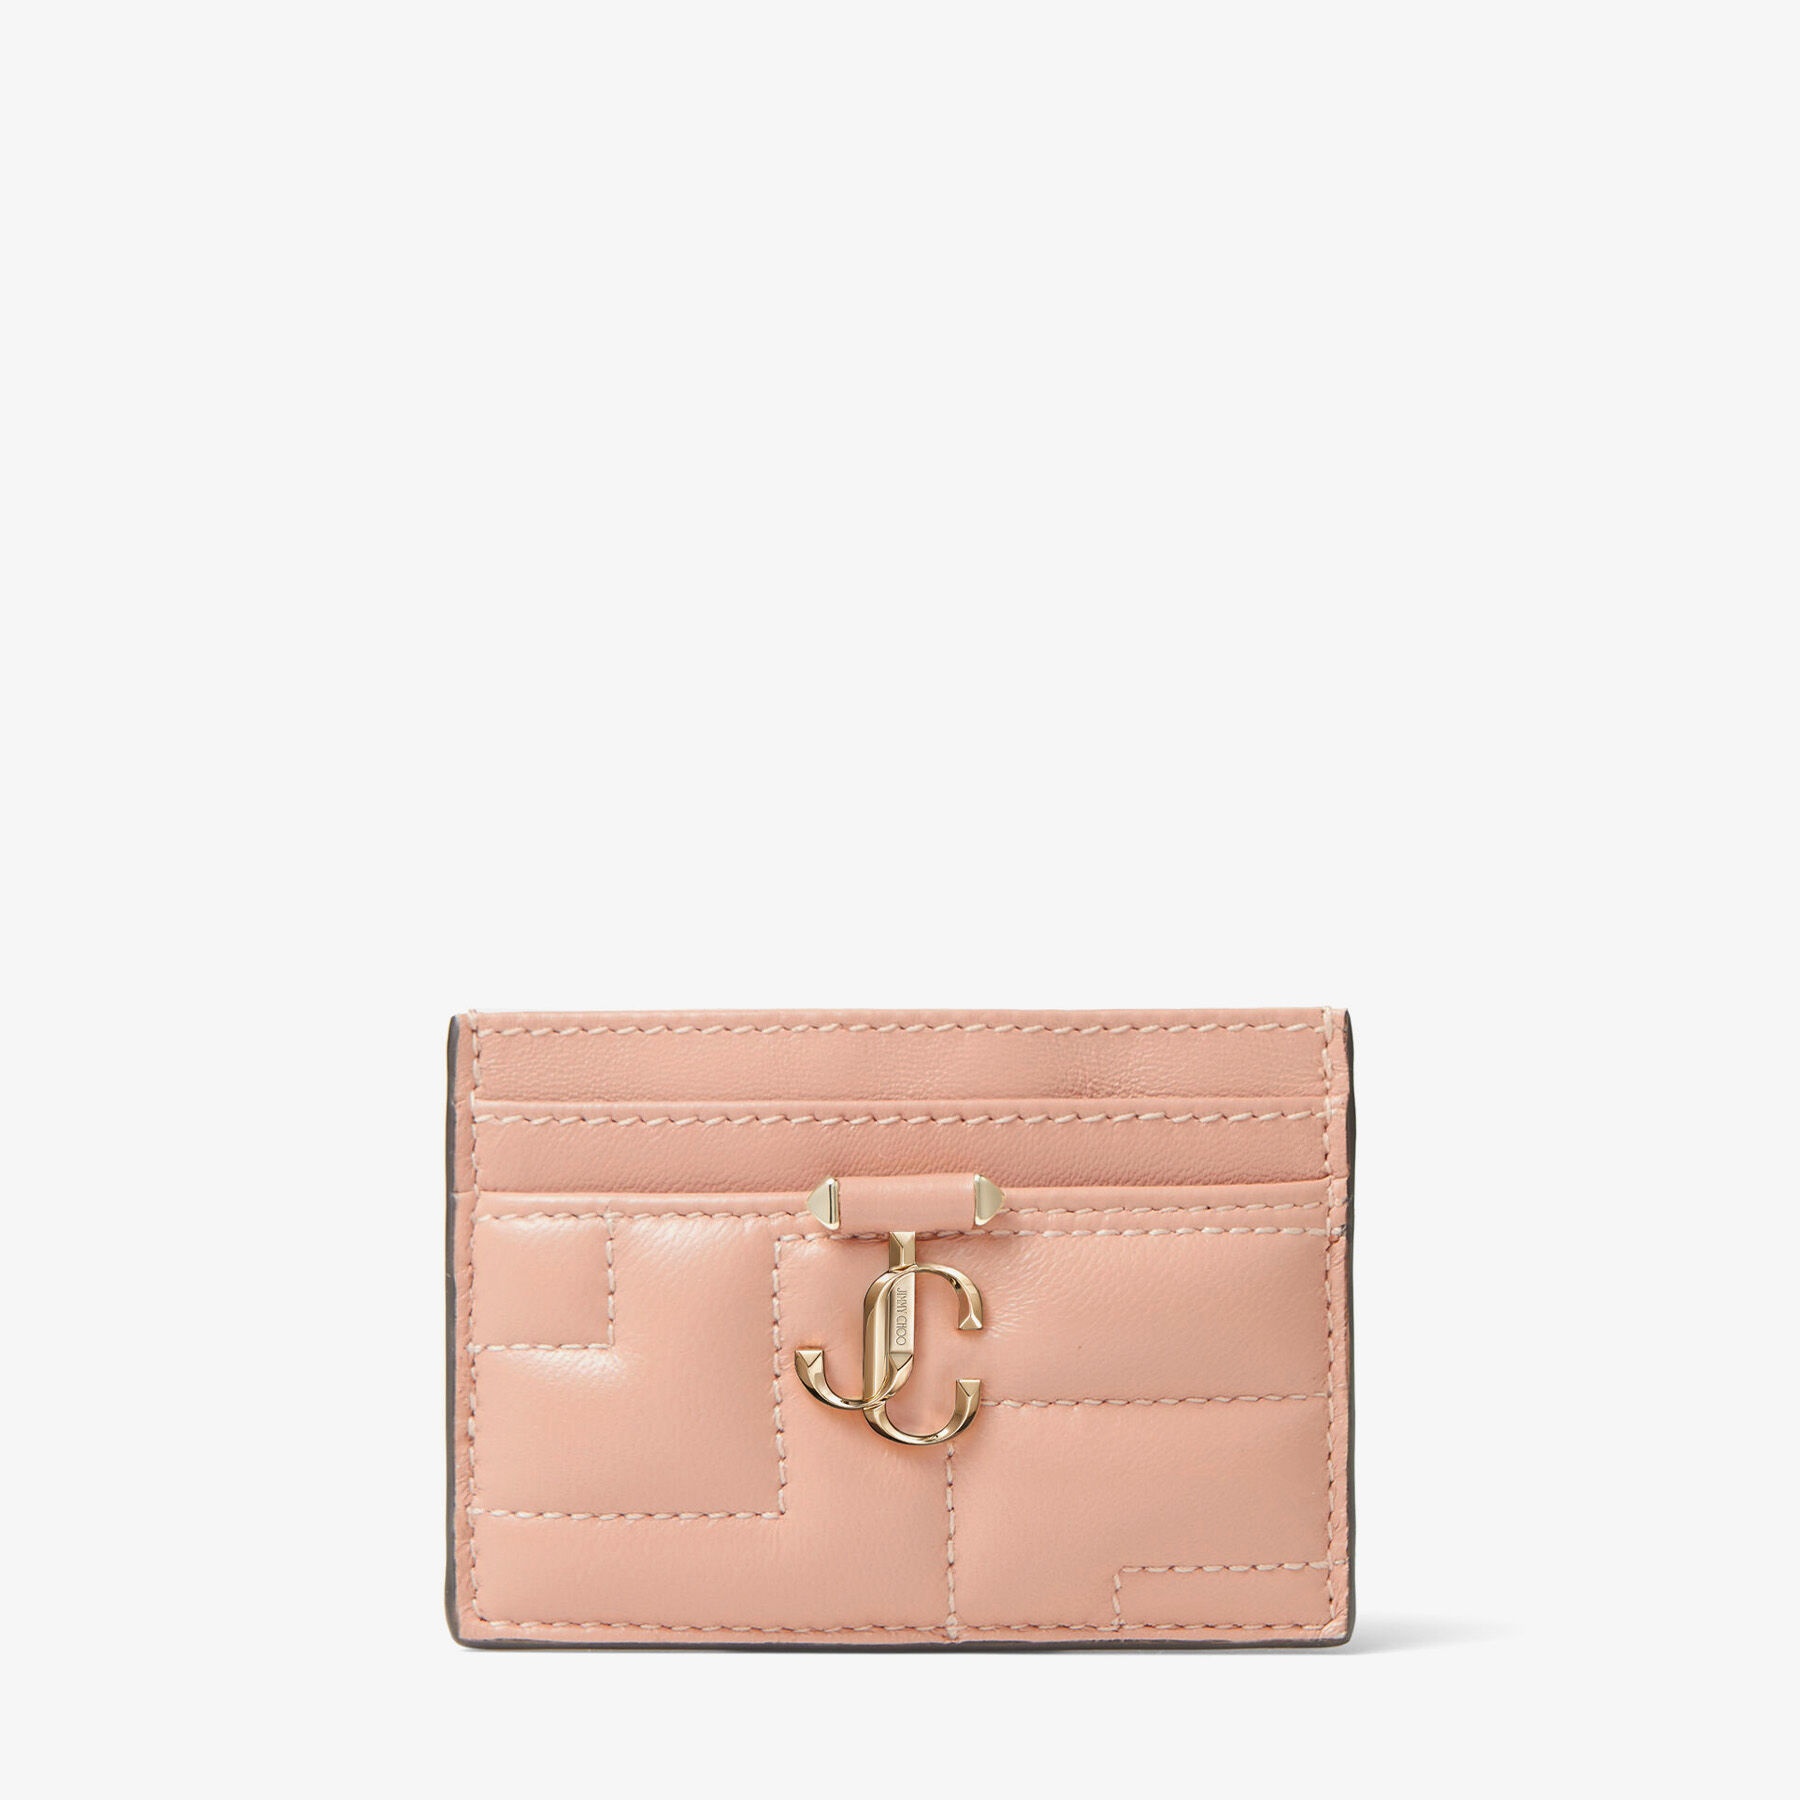 Umika Avenue
Ballet Pink Quilted Nappa Leather Card Holder with JC Emblem - 1